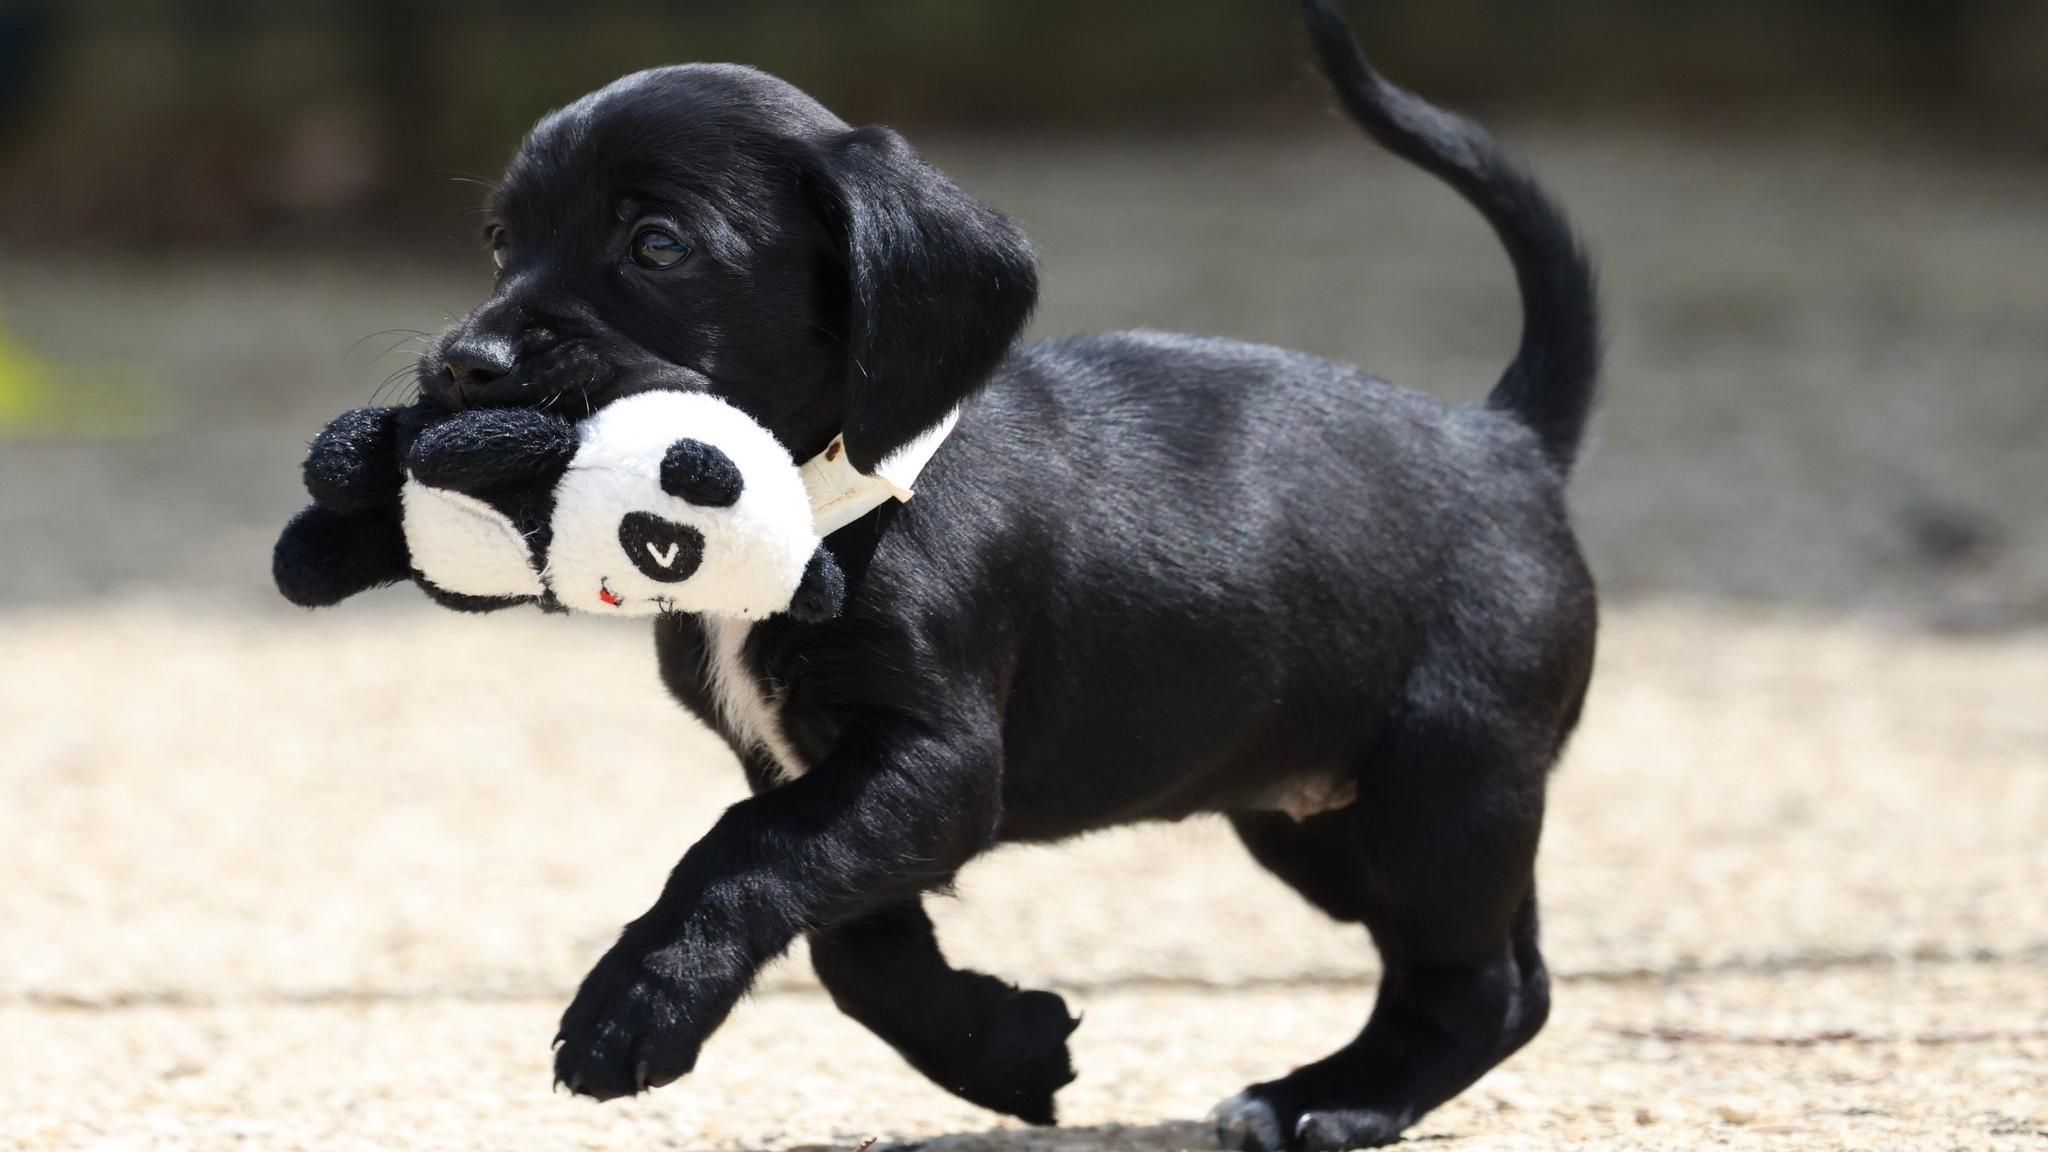 A black puppy running with a small stuffed panda toy in its mouth